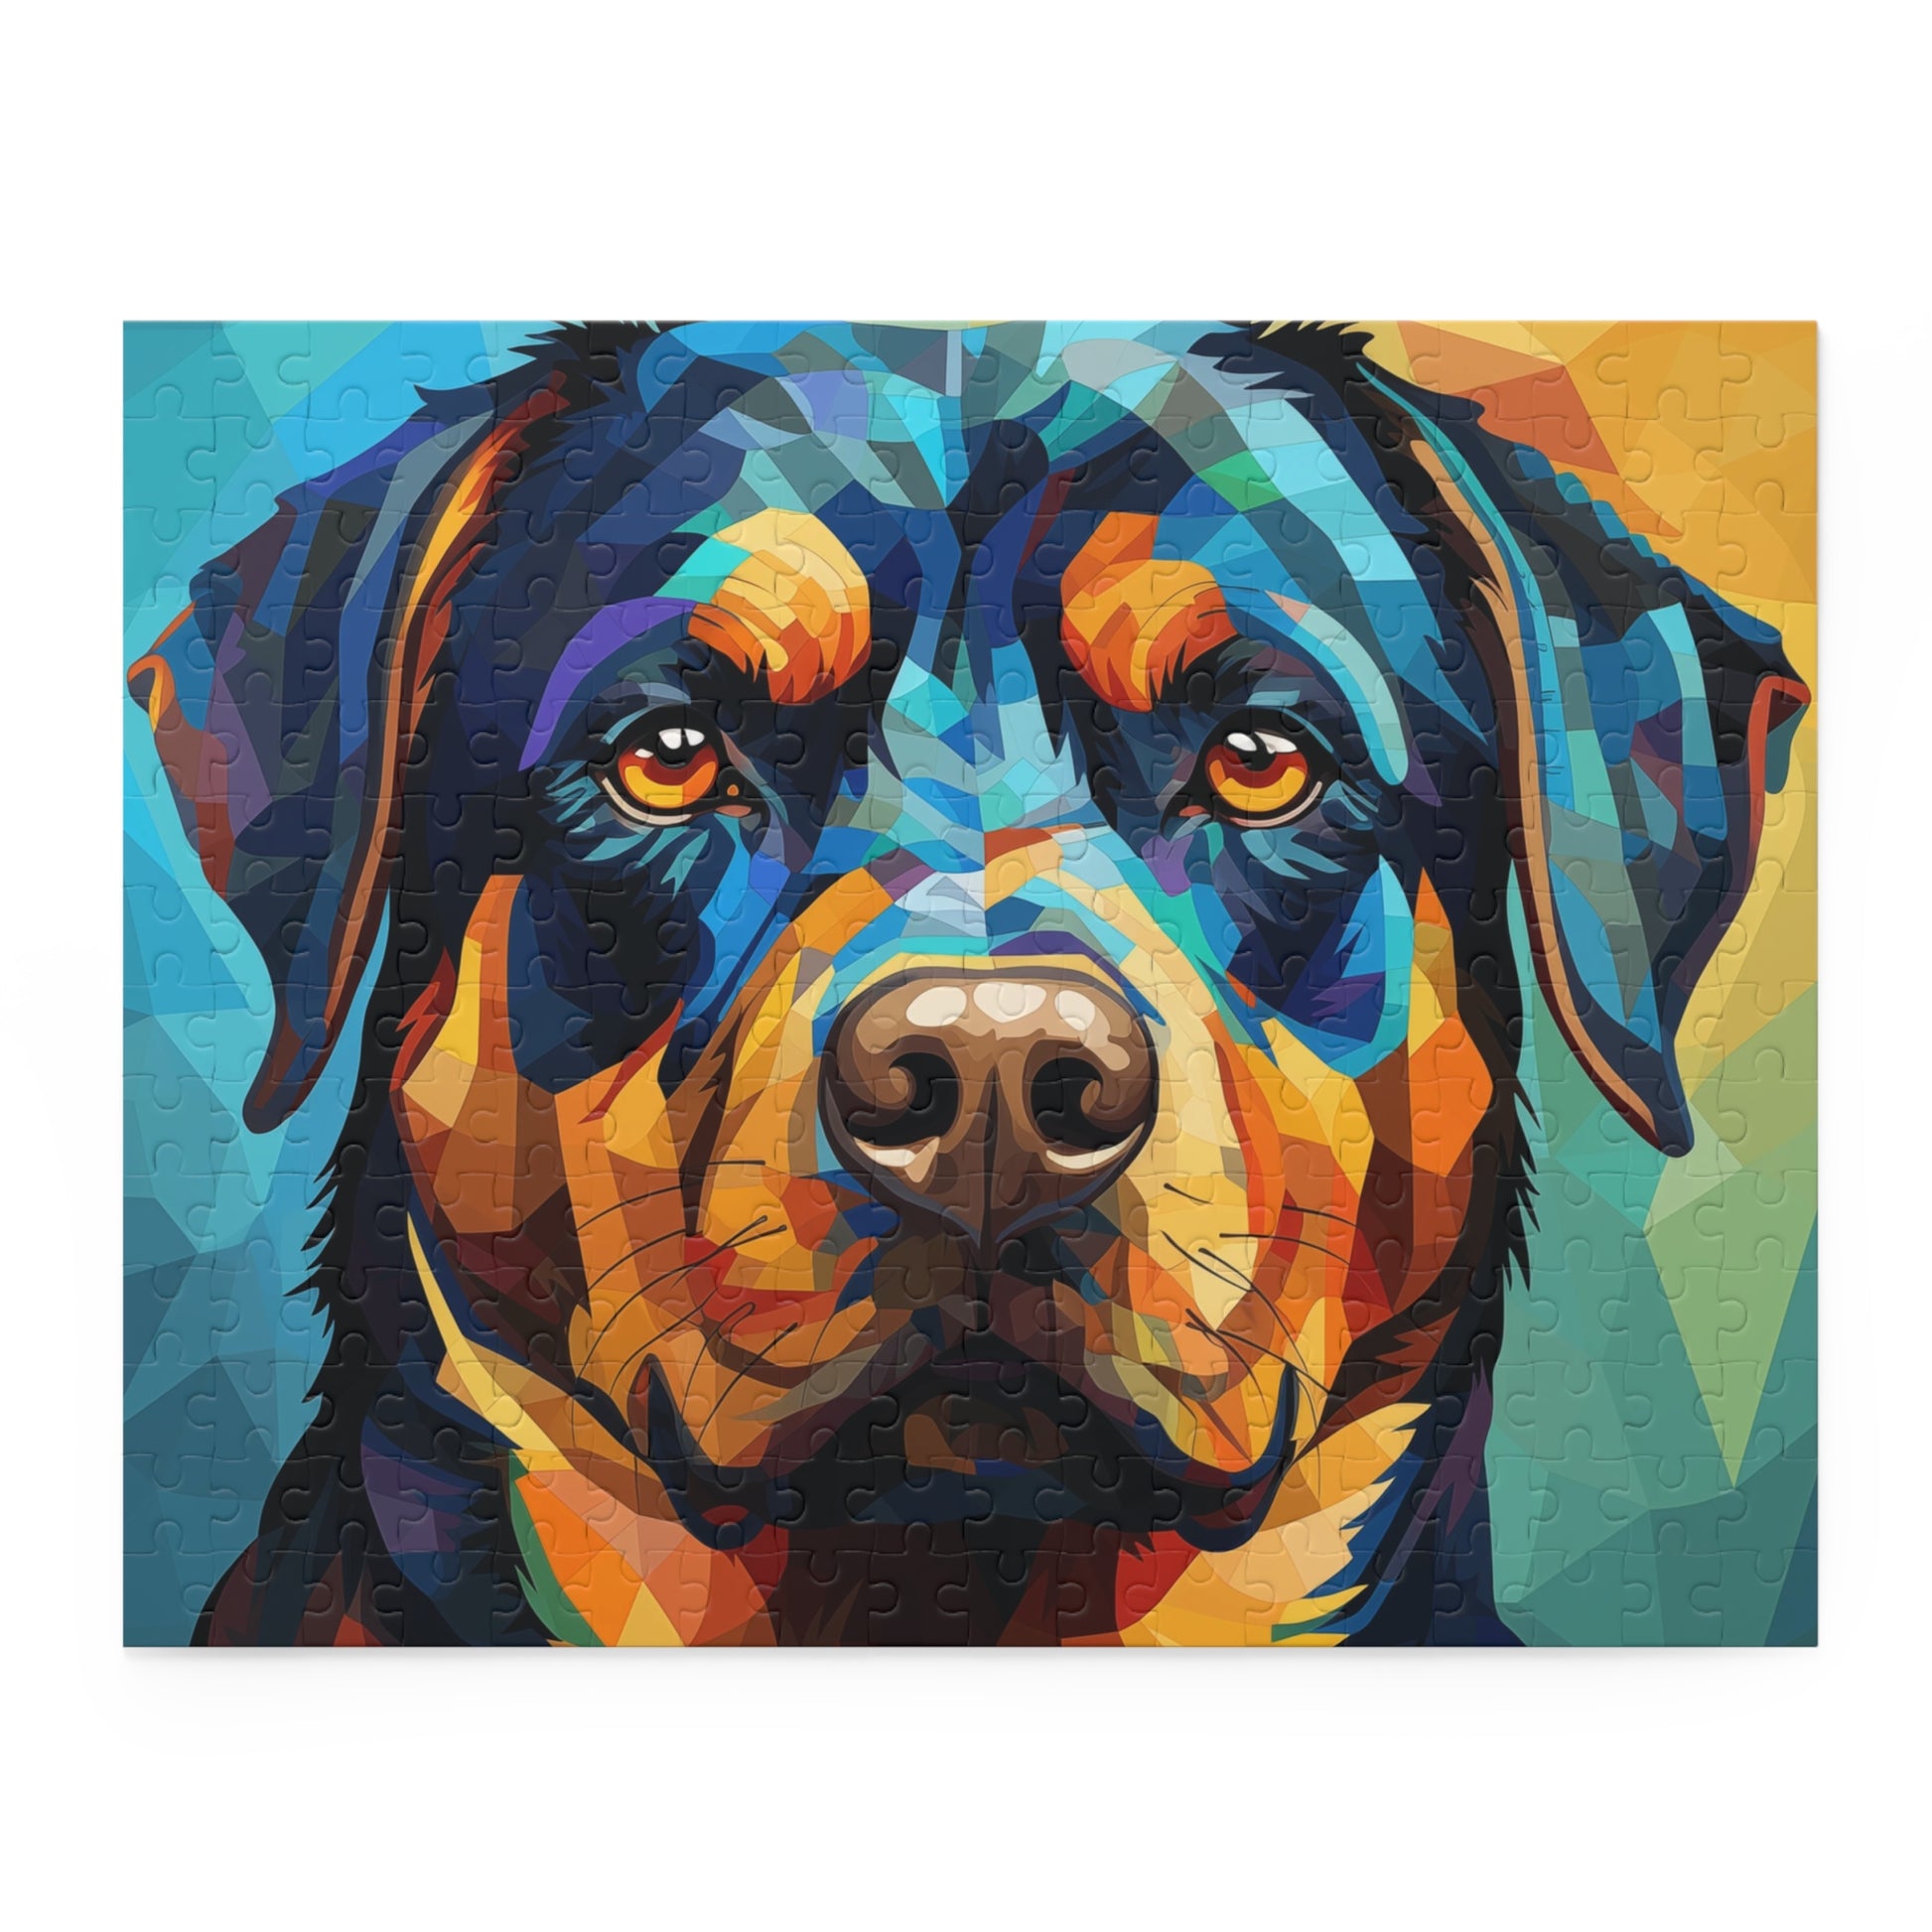 Watercolor Rottweiler Puzzle for Boys, Girls, Kids - Jigsaw Vibrant Oil Paint Dog Puzzle - Abstract Lover Gift - Rottweiler Trippy Puzzle Adult Birthday Business Jigsaw Puzzle Gift for Him Funny Humorous Indoor Outdoor Game Gift For Her Online-3